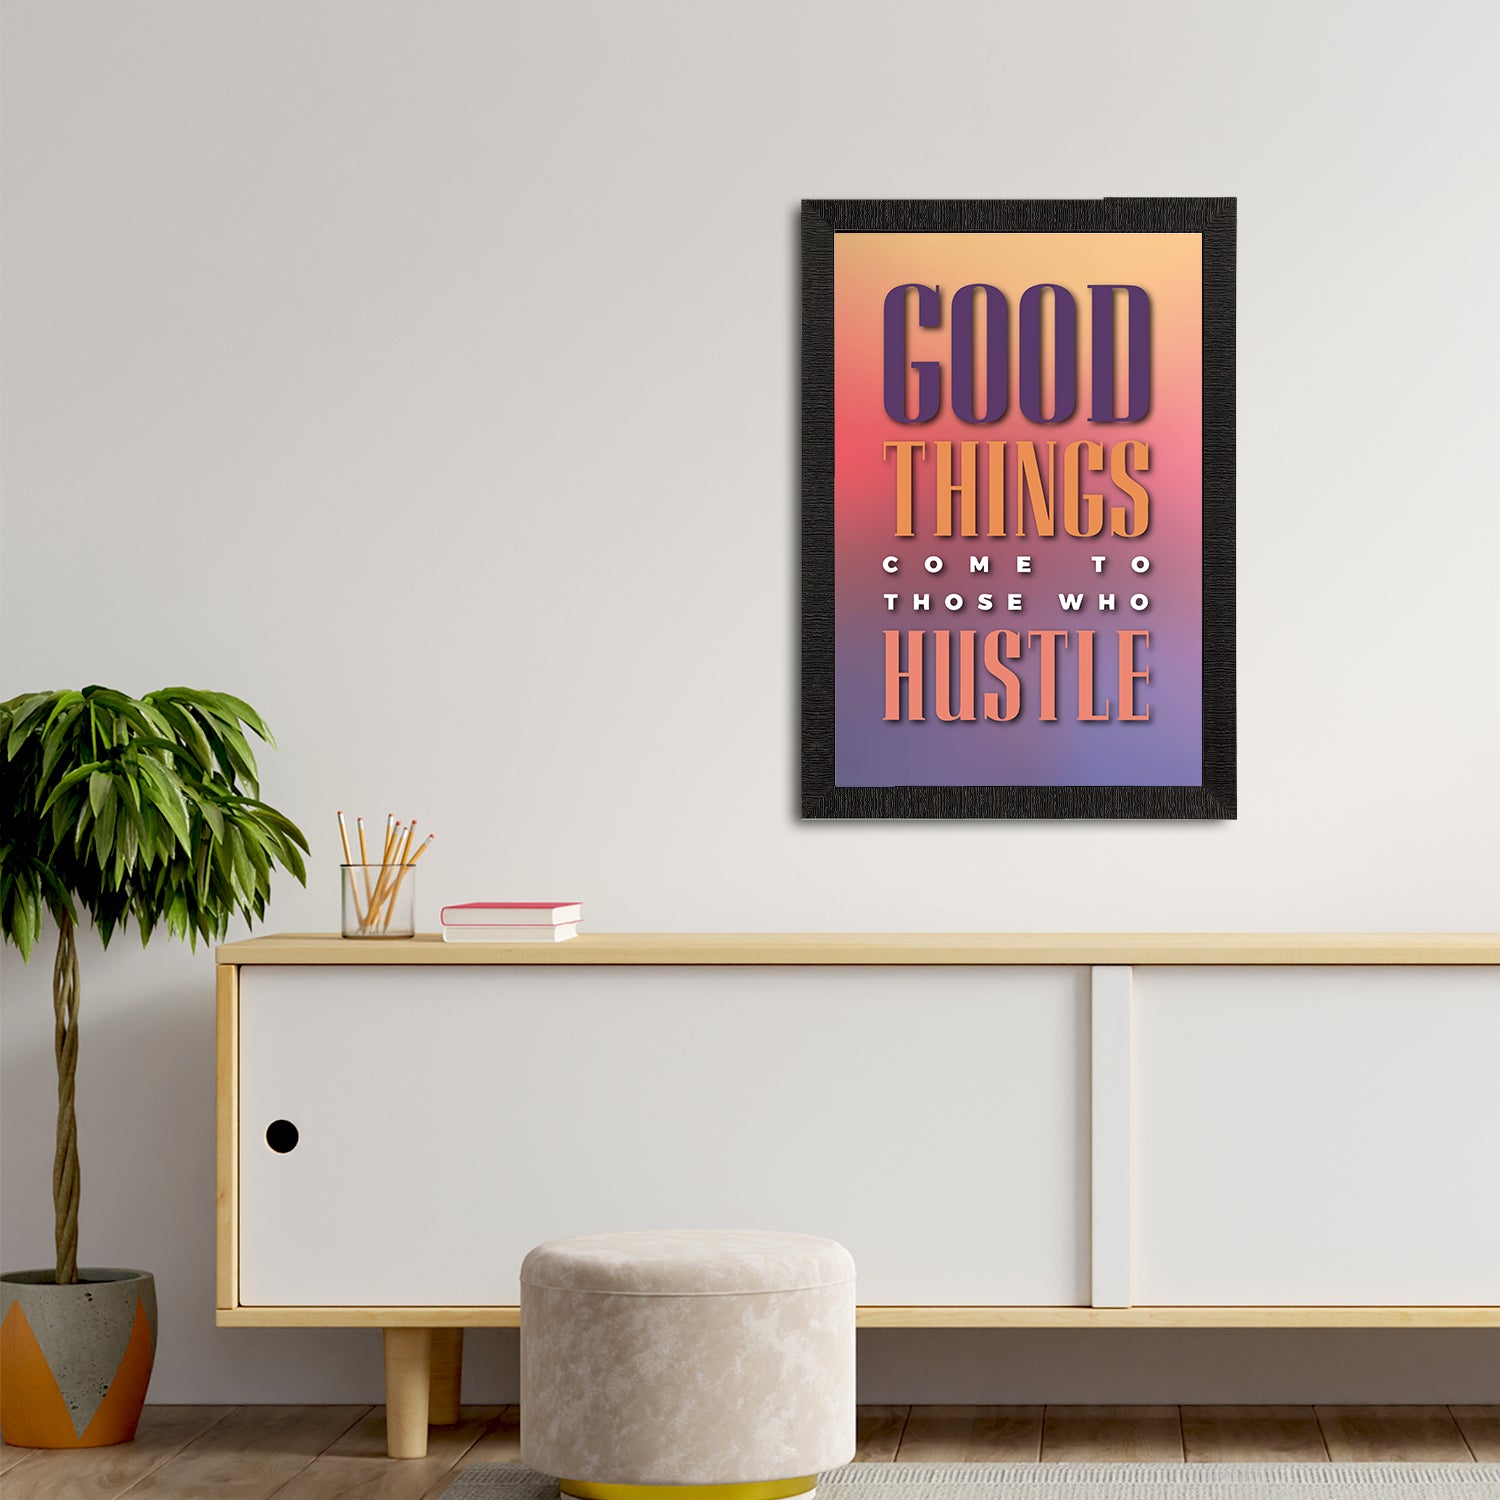 "Good Things Come to Those Who Hustle" Motivational Quote Satin Matt Texture UV Art Painting 2